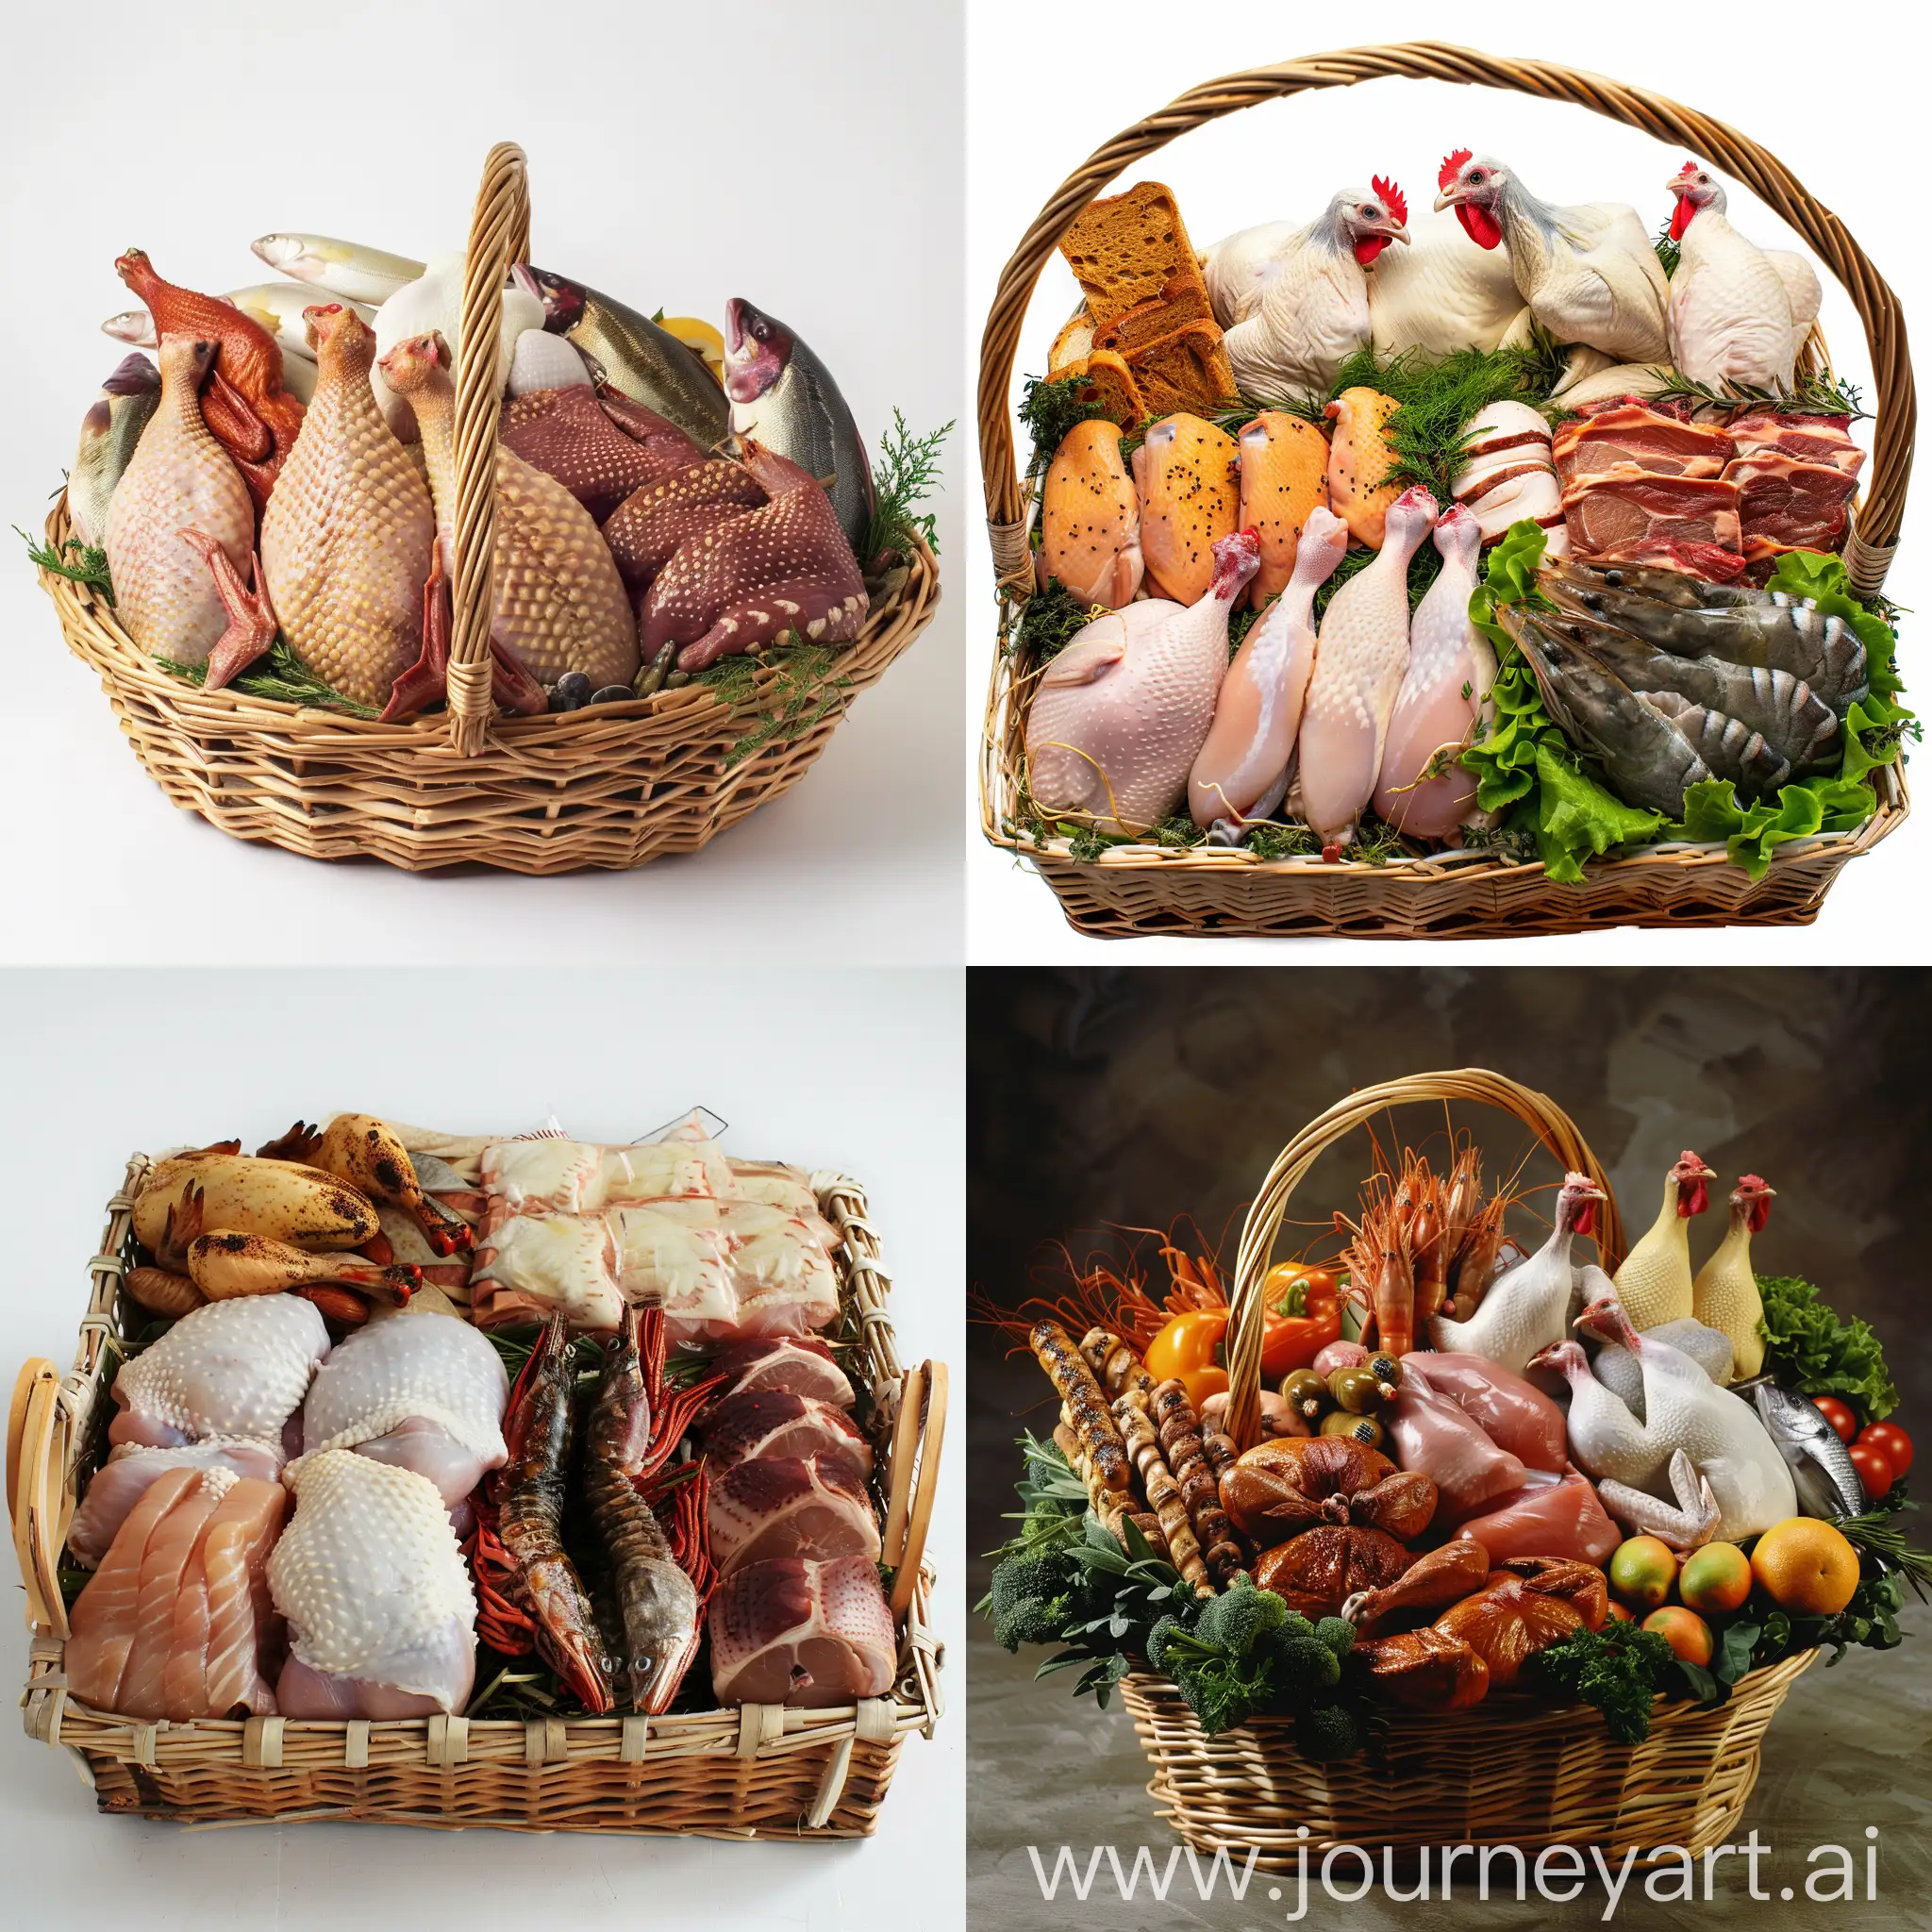 Basket-of-Fresh-Poultry-and-Aquatic-Products